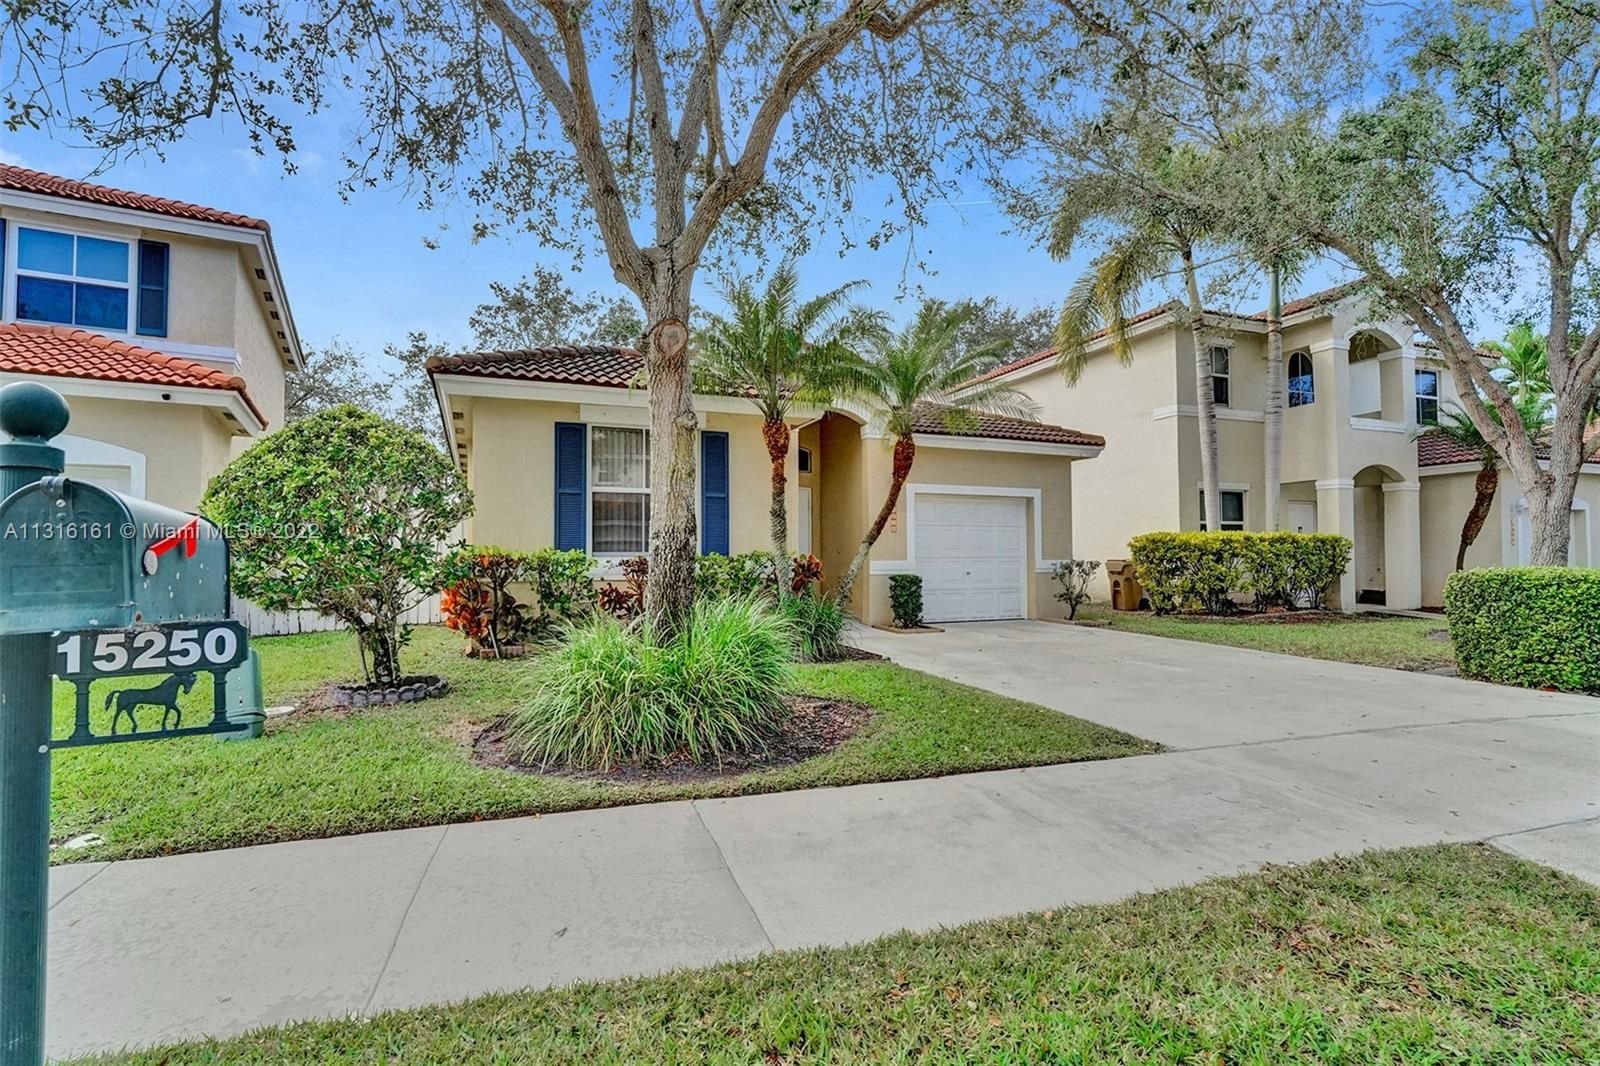 Real estate property located at 15250 49th St, Broward County, Davie, FL